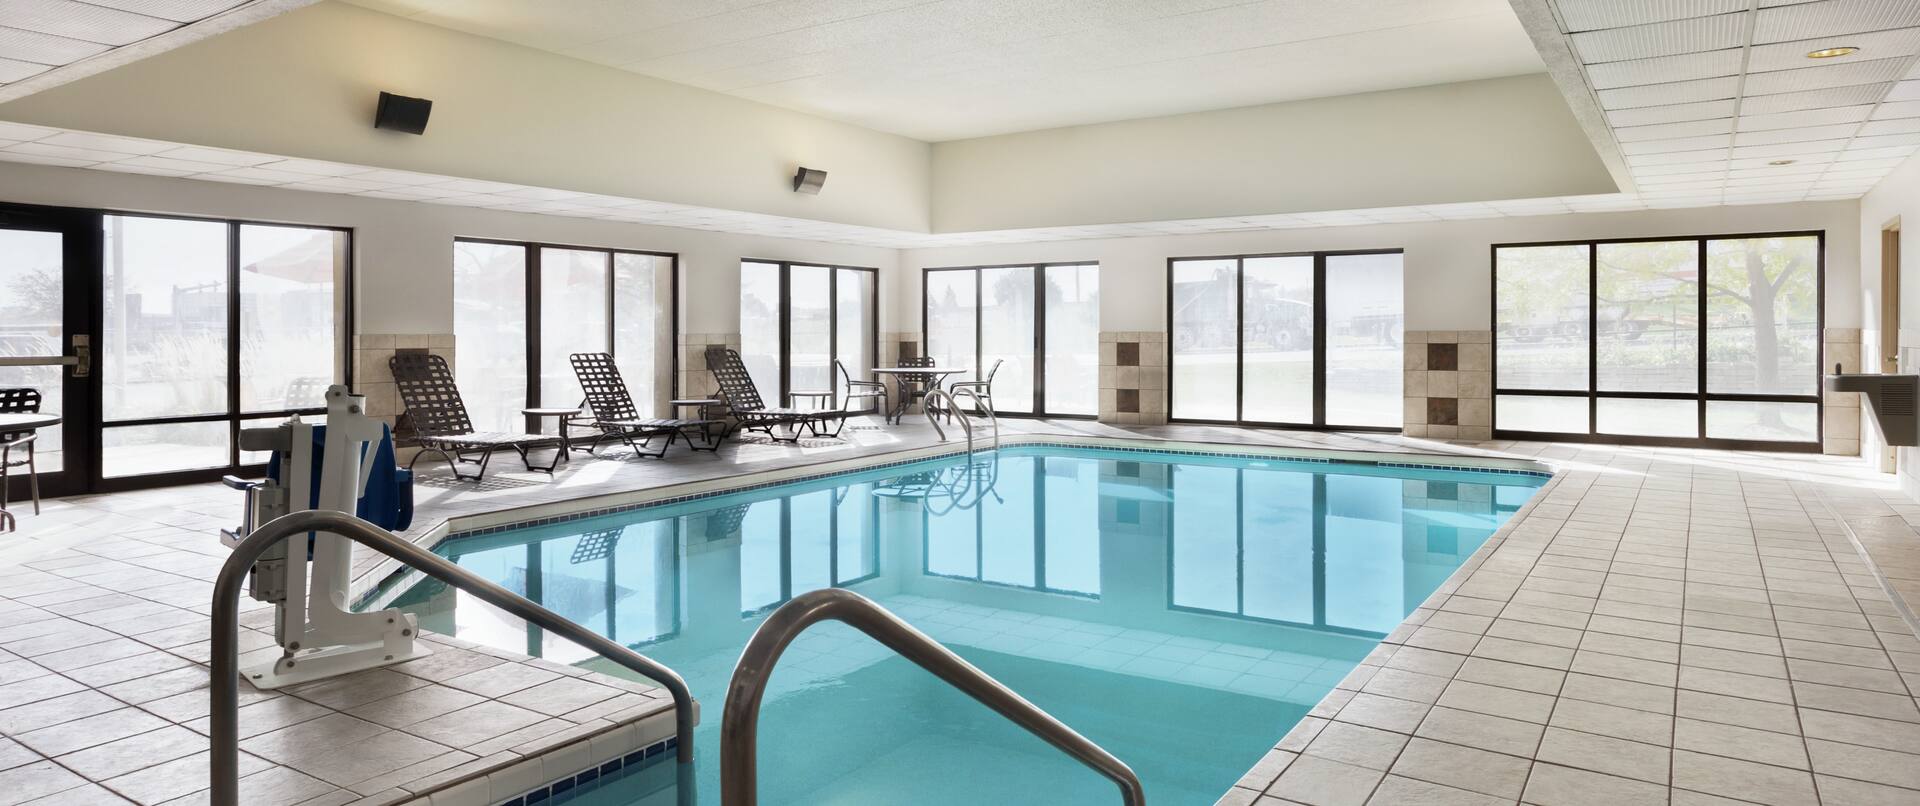 Spacious indoor pool featuring accessible chair lift, ample seating, and large floor to ceiling windows.